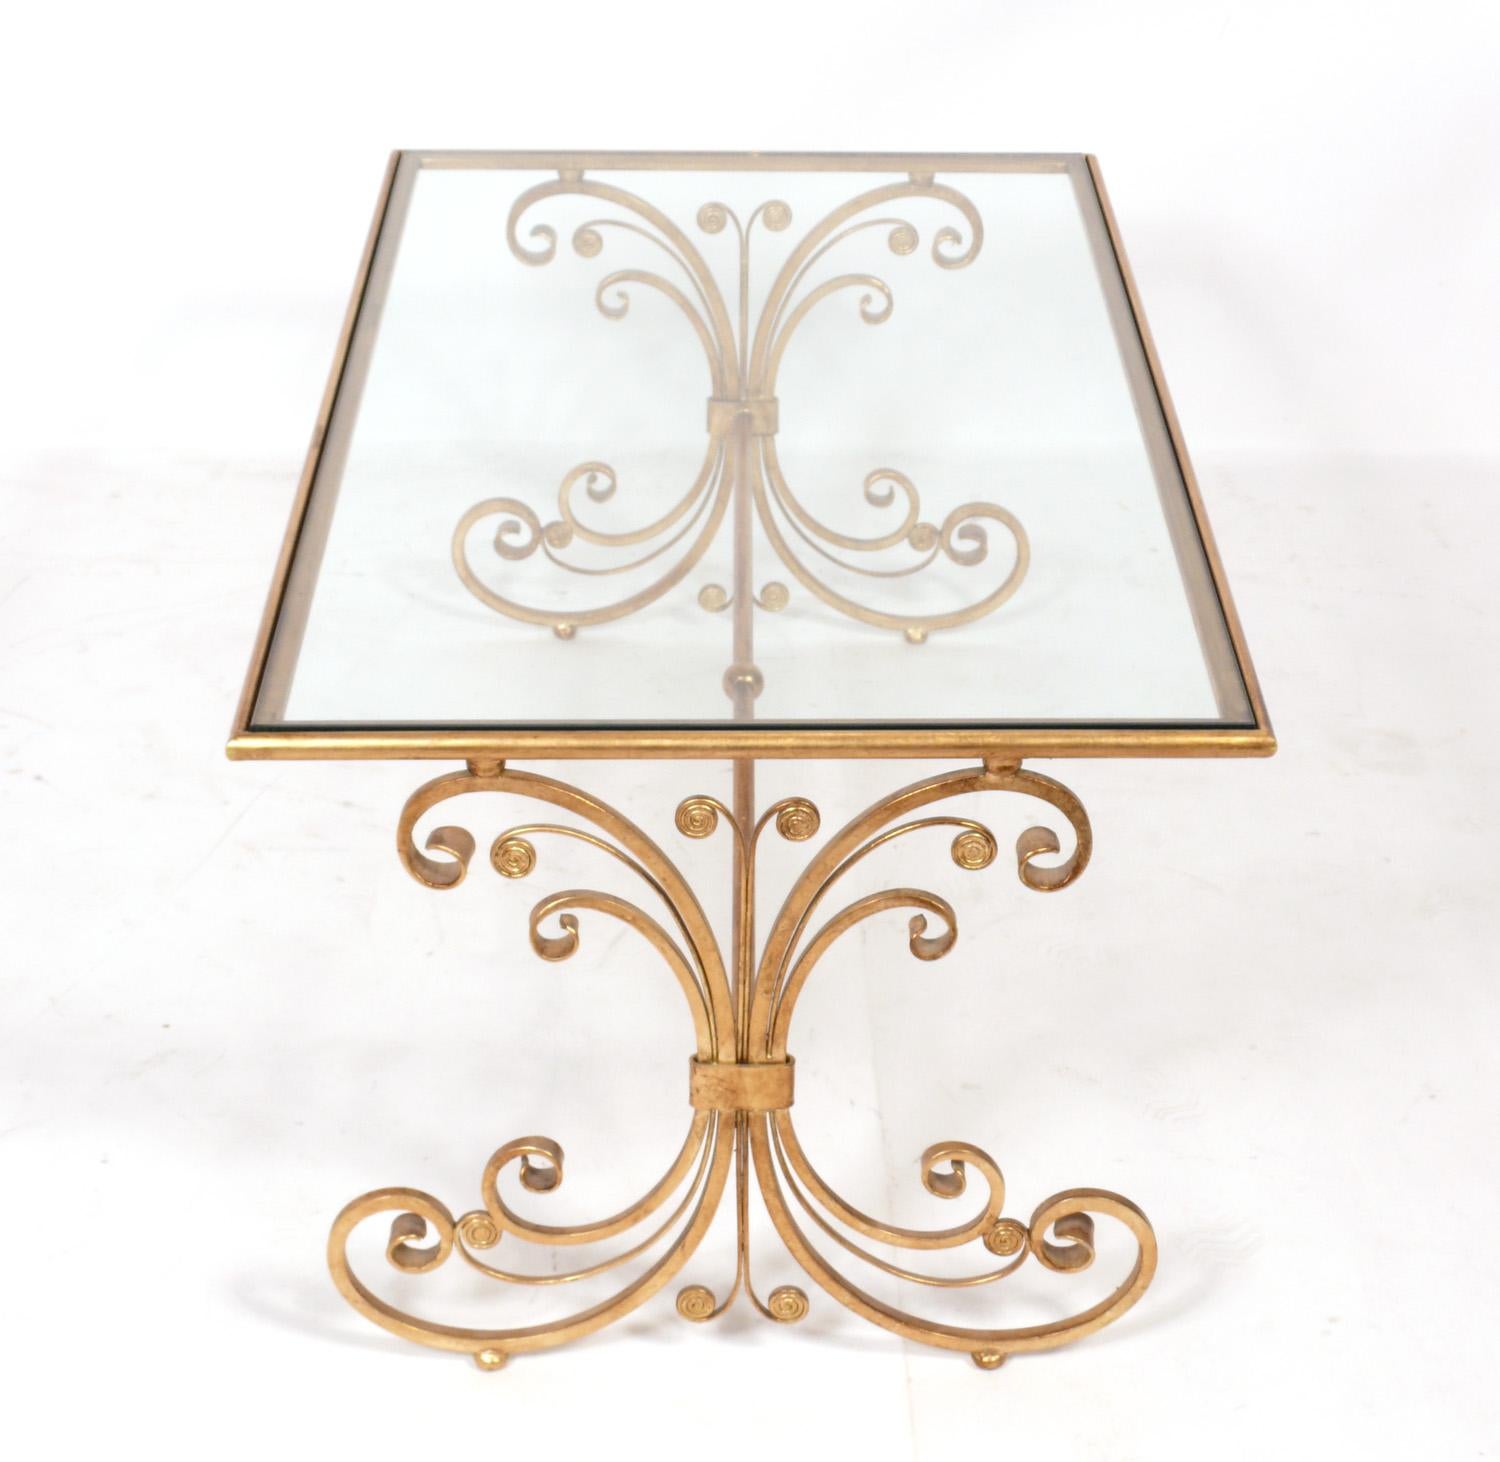 Gilt metal coffee table, late 20th century. Retains wonderful patina to the gilt metal. Solid construction with heavyweight glass top.